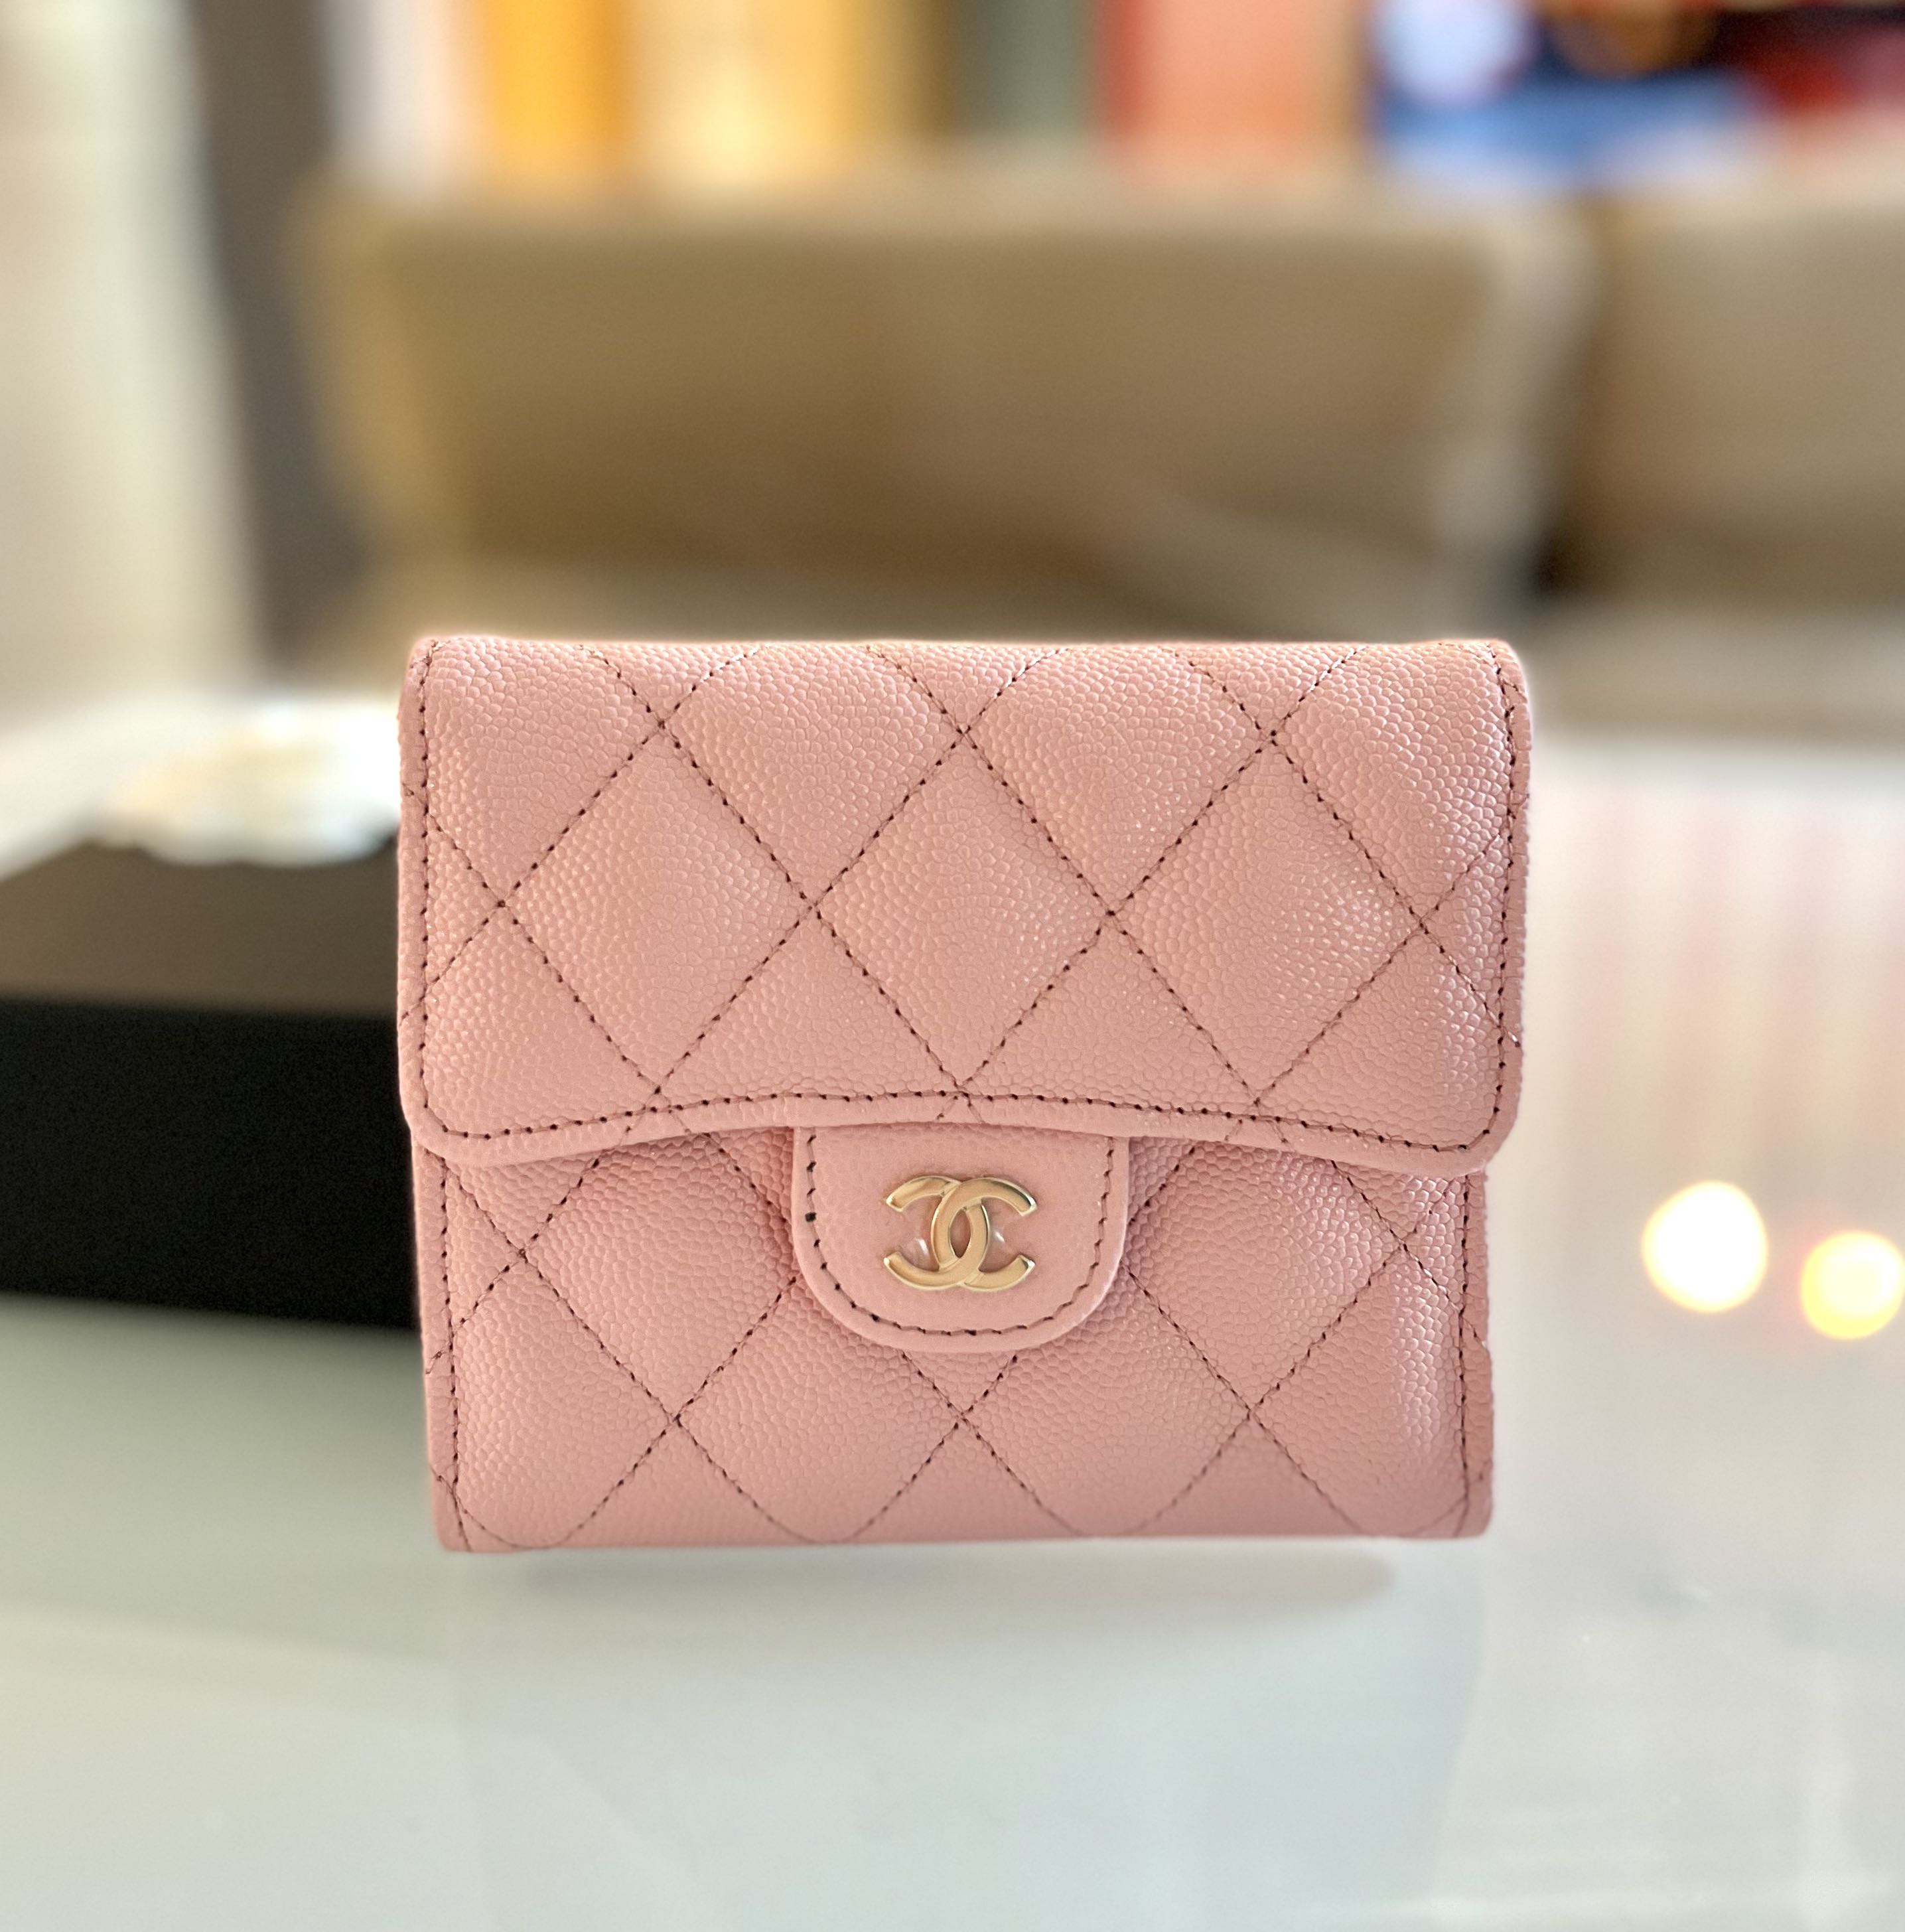 UNBOXING CHANEL CLASSIC SMALL FLAP WALLET (PINK)👛✨#unboxing